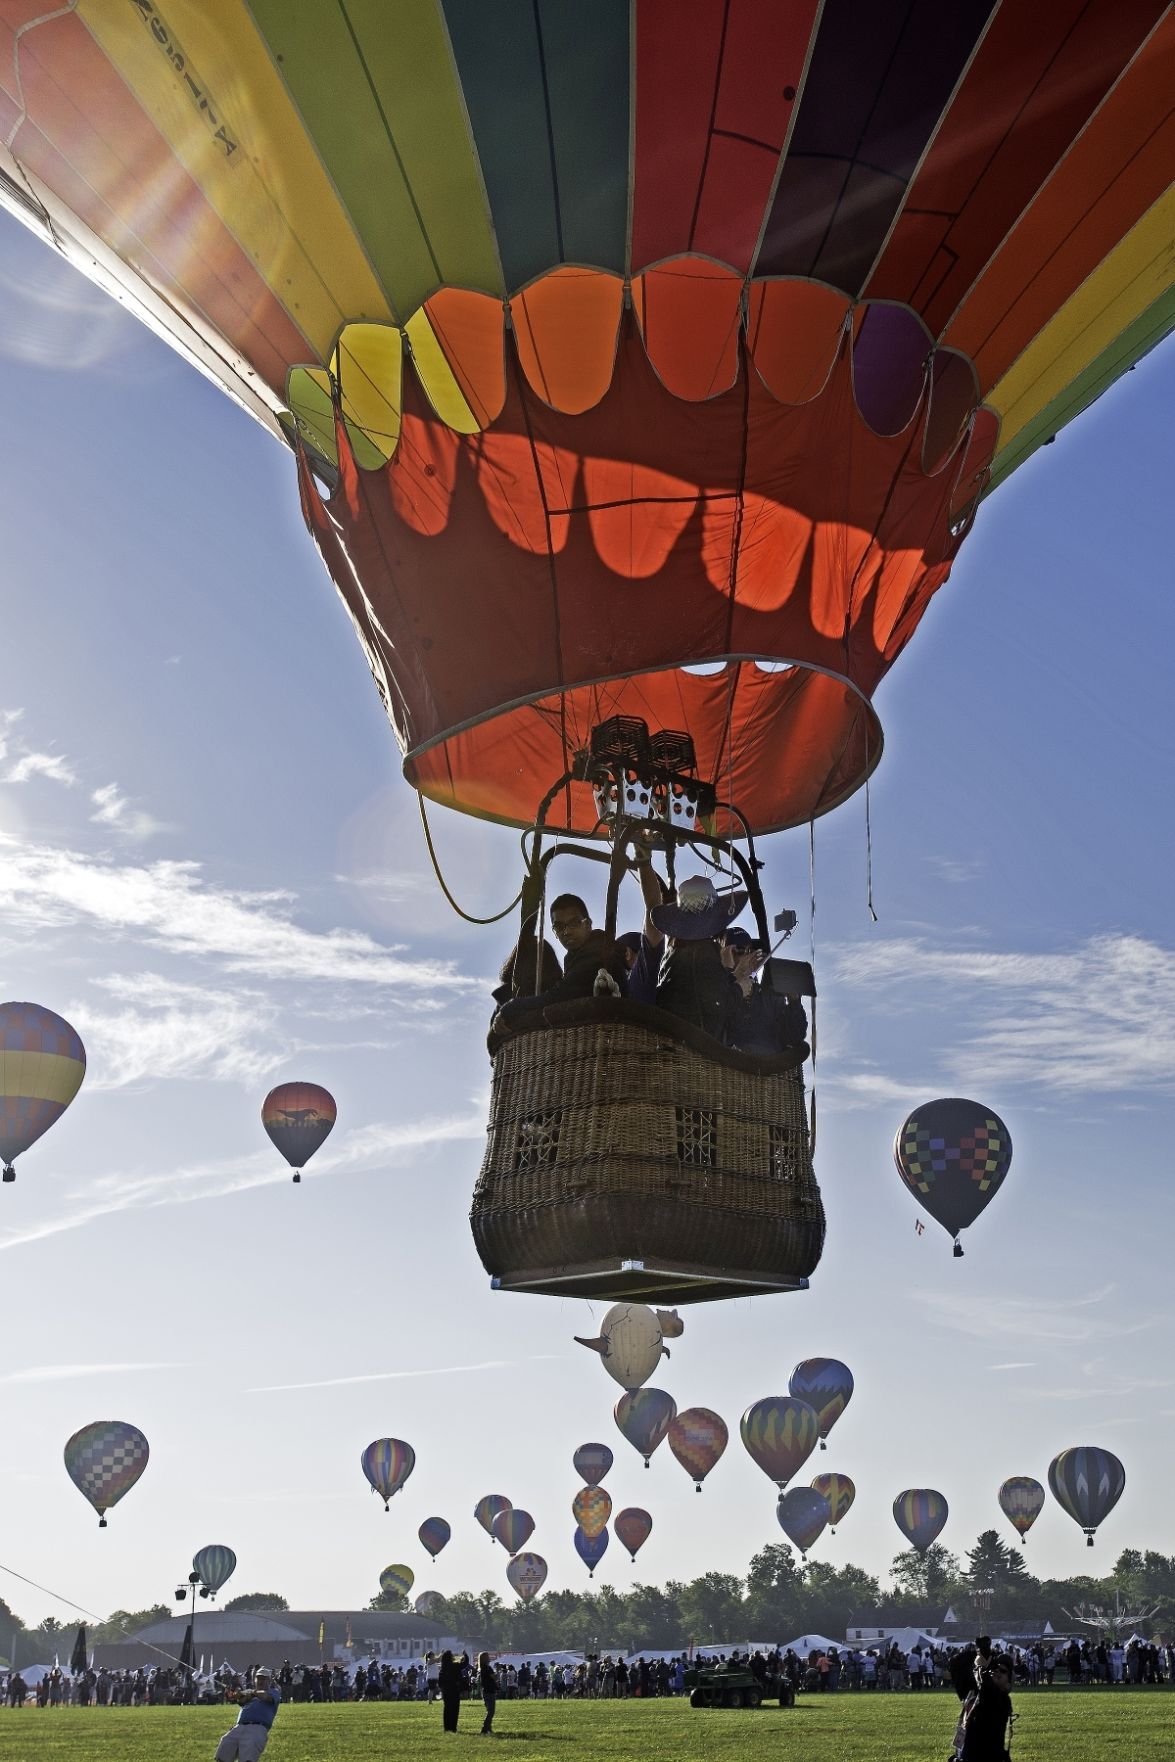 QuickChek balloon festival draws thousands to Solberg Airport